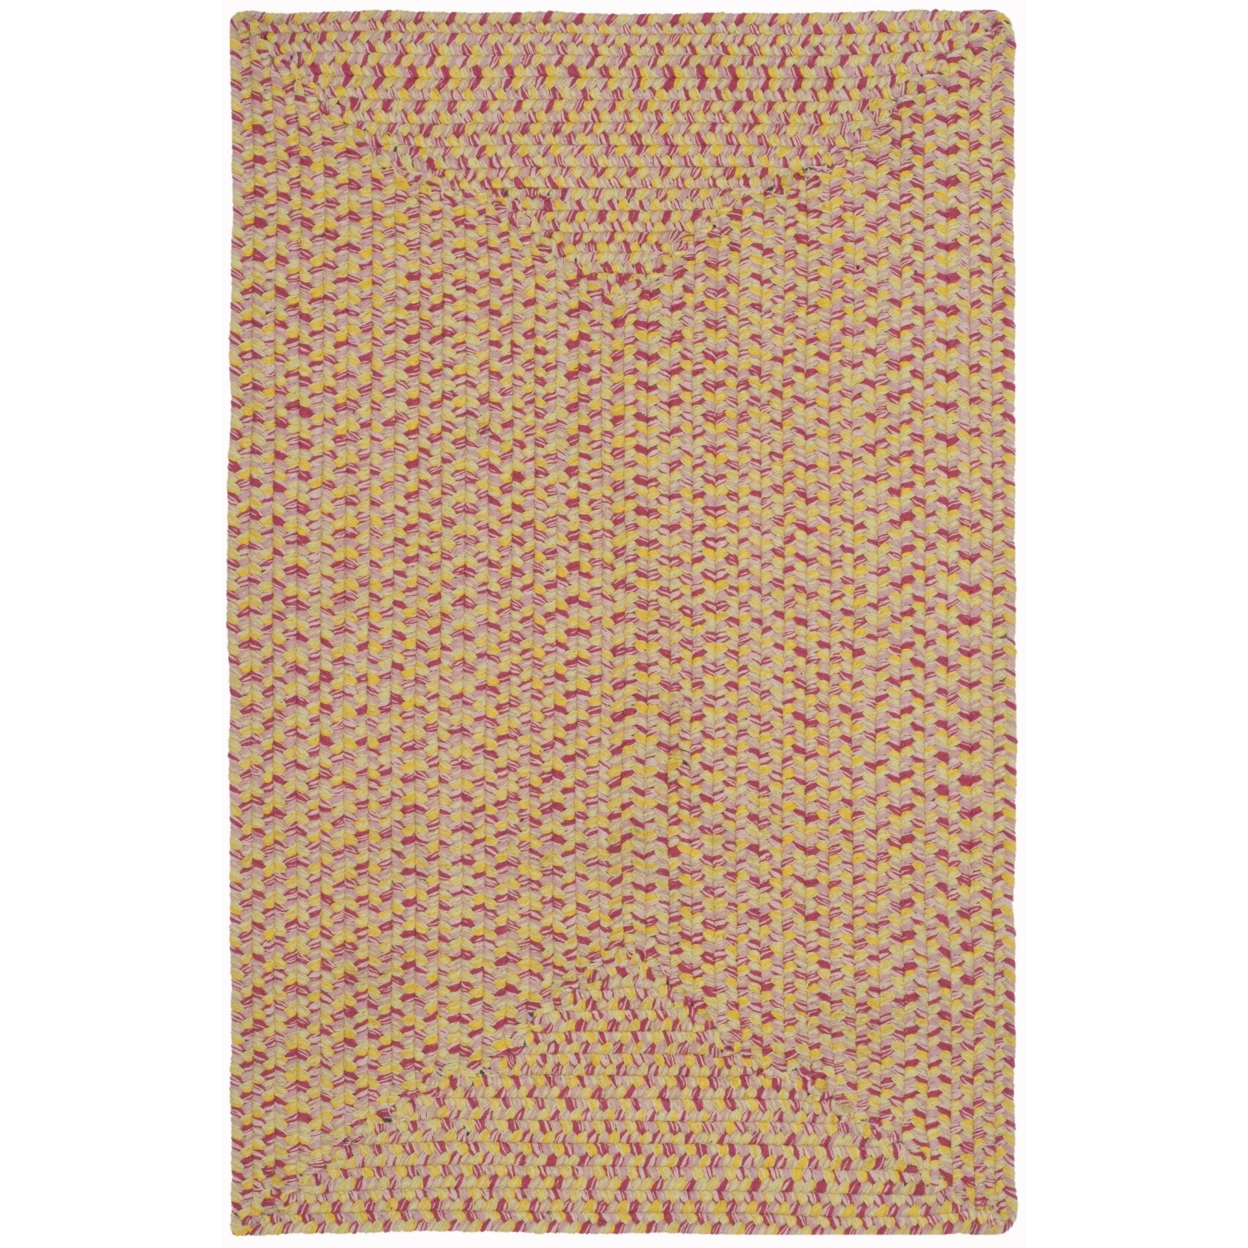 SAFAVIEH Braided Collection BRD164A Handwoven Multi Rug - 4' X 6'